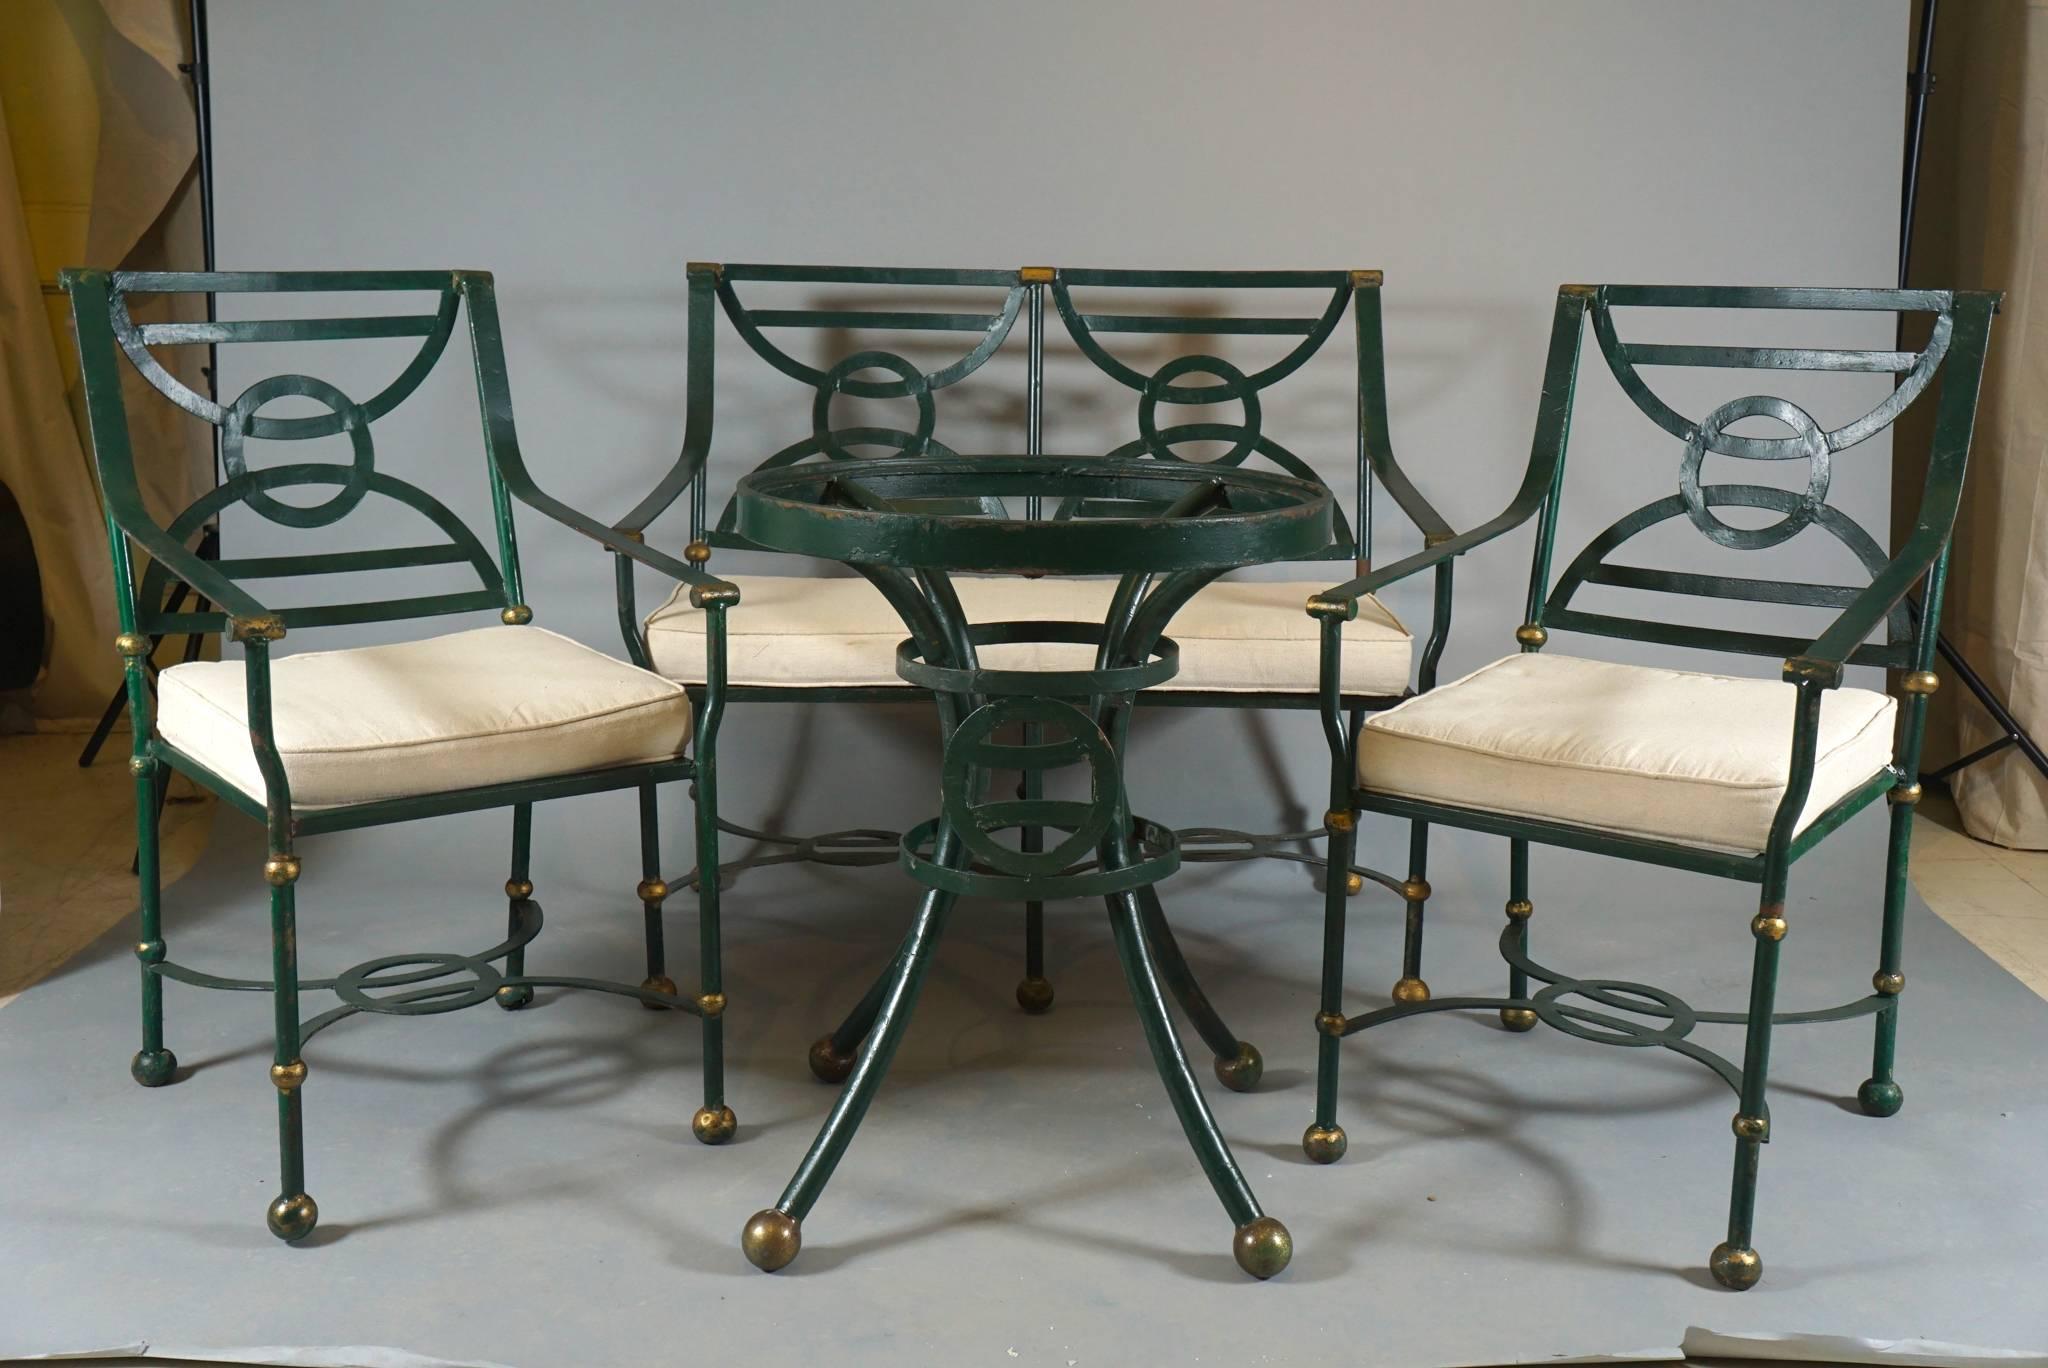 Four-piece set of iron garden furniture classical motif. bench, two armchairs and table with glass top
handcrafted iron with paint and gilt details.